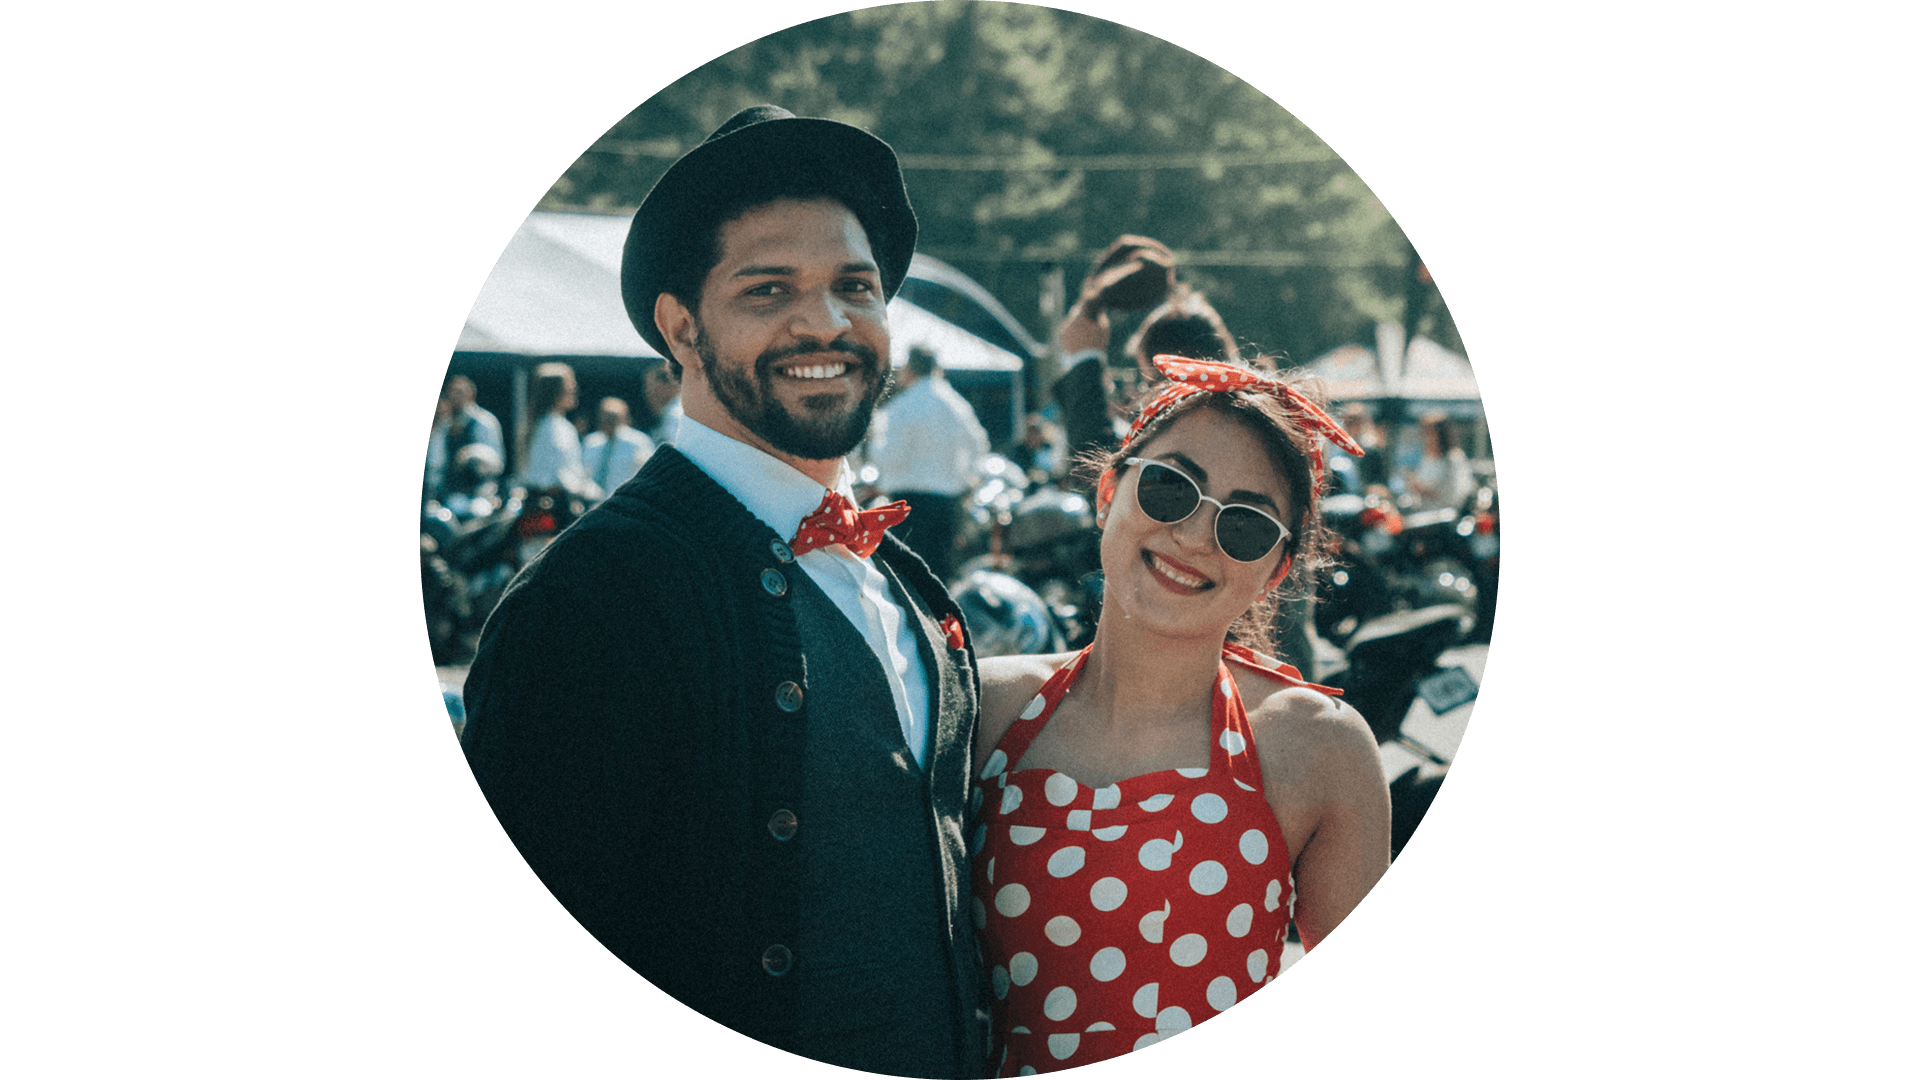 A man and woman dressed in matching dapper clothing at a DGR ride event.